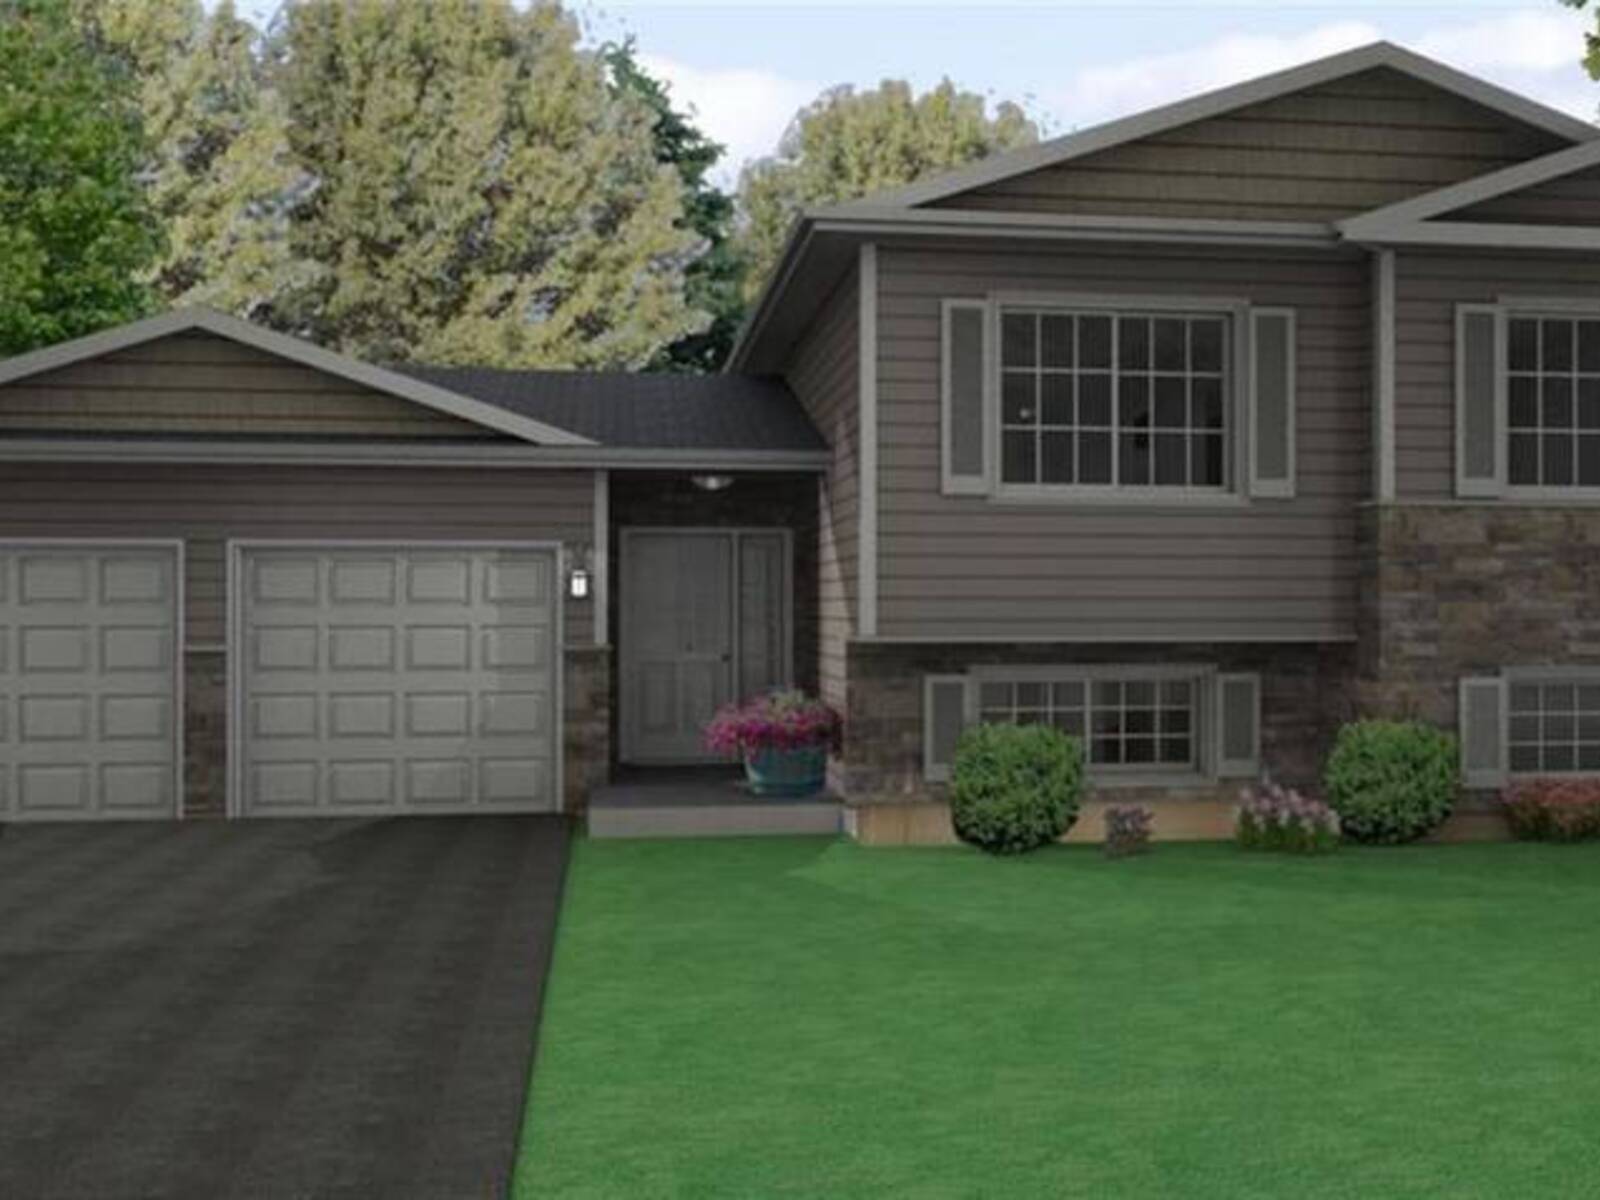 Lot 86(A) ROSEDAL ROAD, Smiths Falls, Ontario K7A 4S6